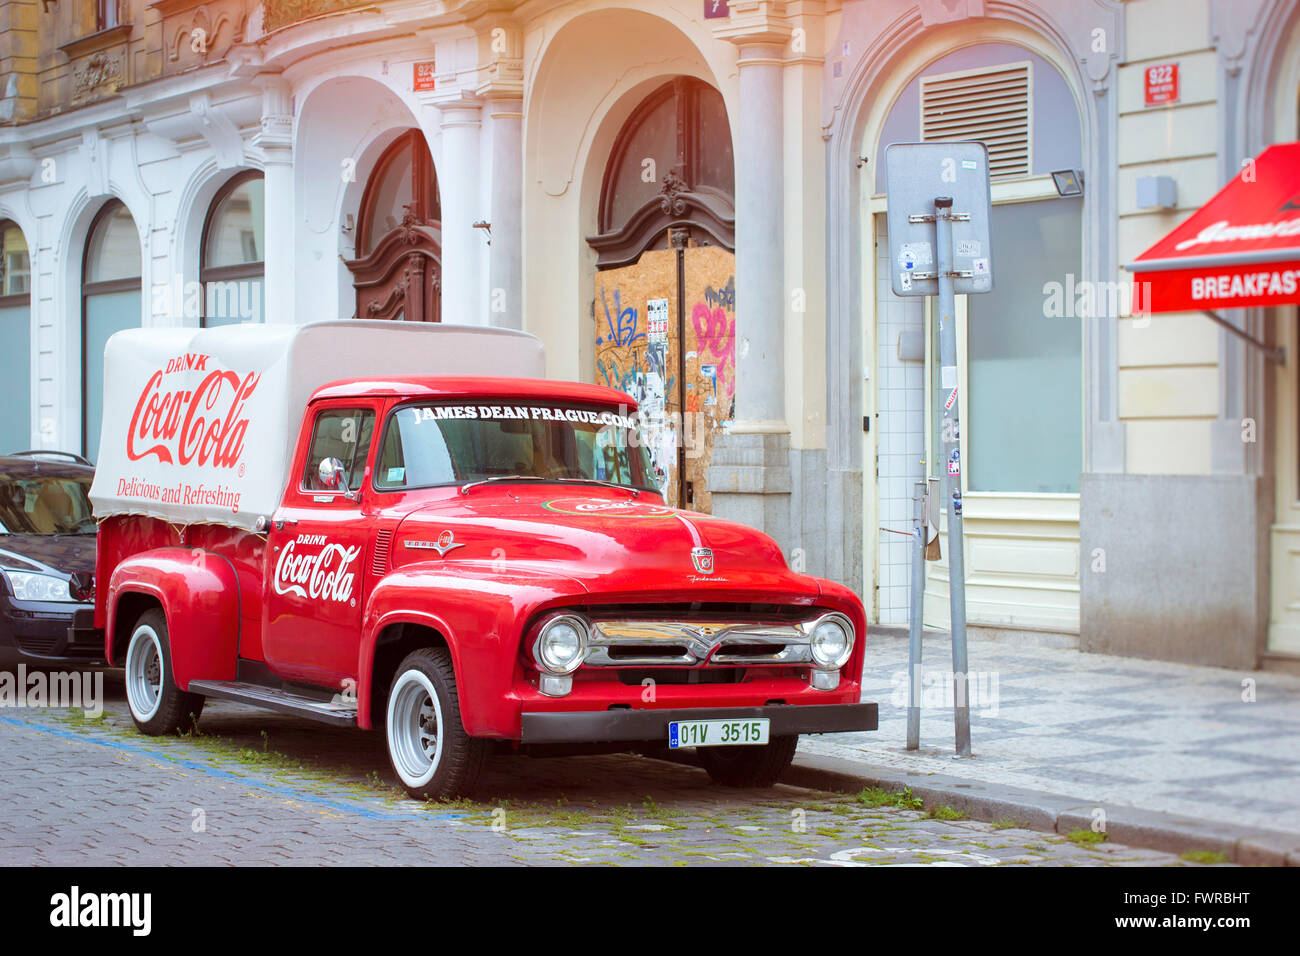 PRAGUE, CZECH REPUBLIC - AUGUST 25, 2015: Old Ford car on the main street near the Old Town Square of Prague, Czech Republic Stock Photo